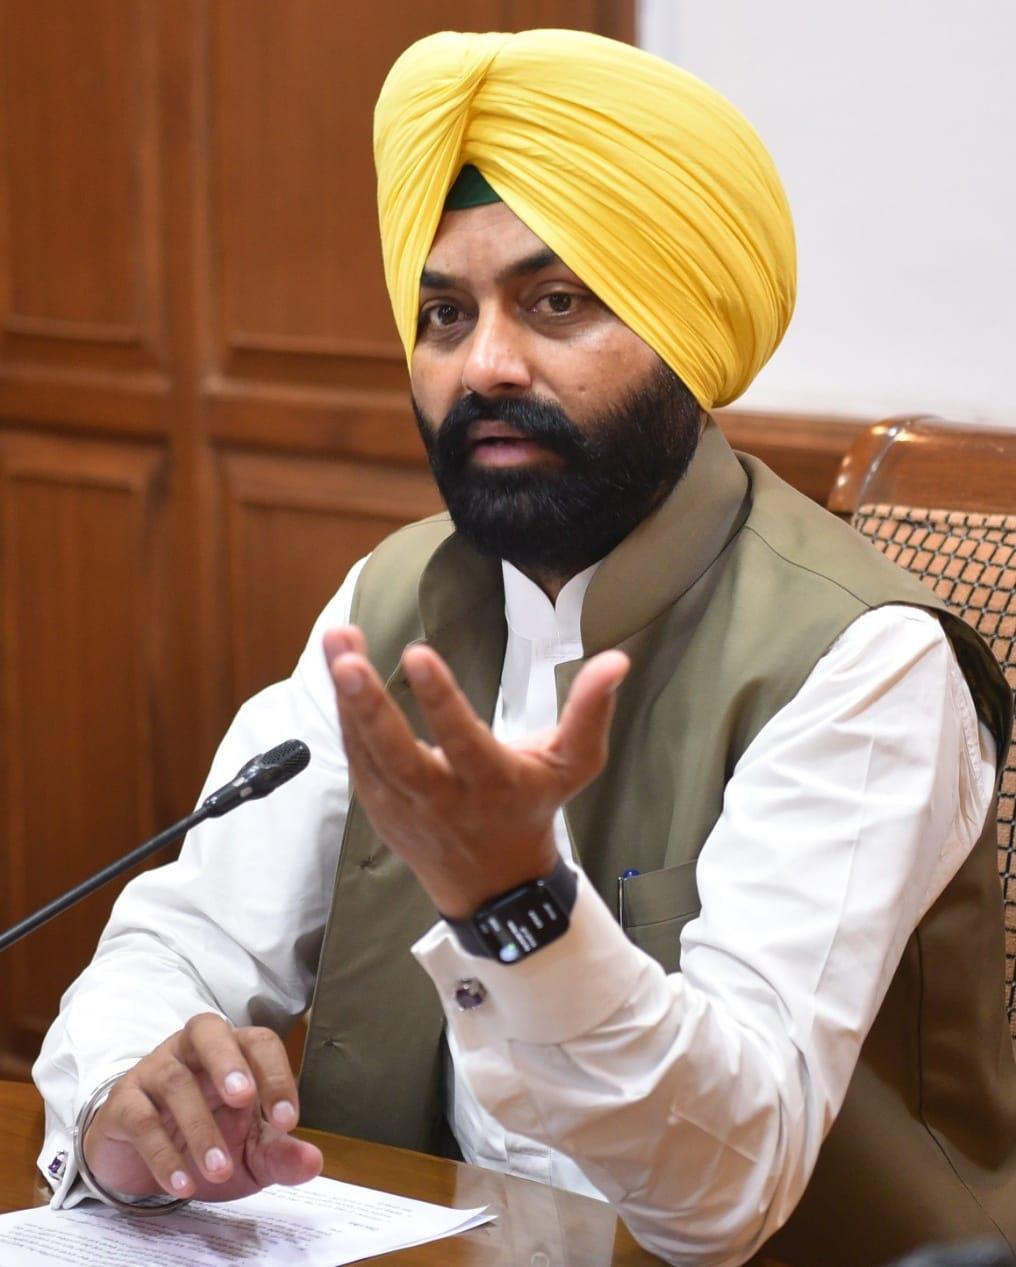 Punjab govt to build memorials of freedom fighters, martyrs in all villages: Minister Laljit Bhullar